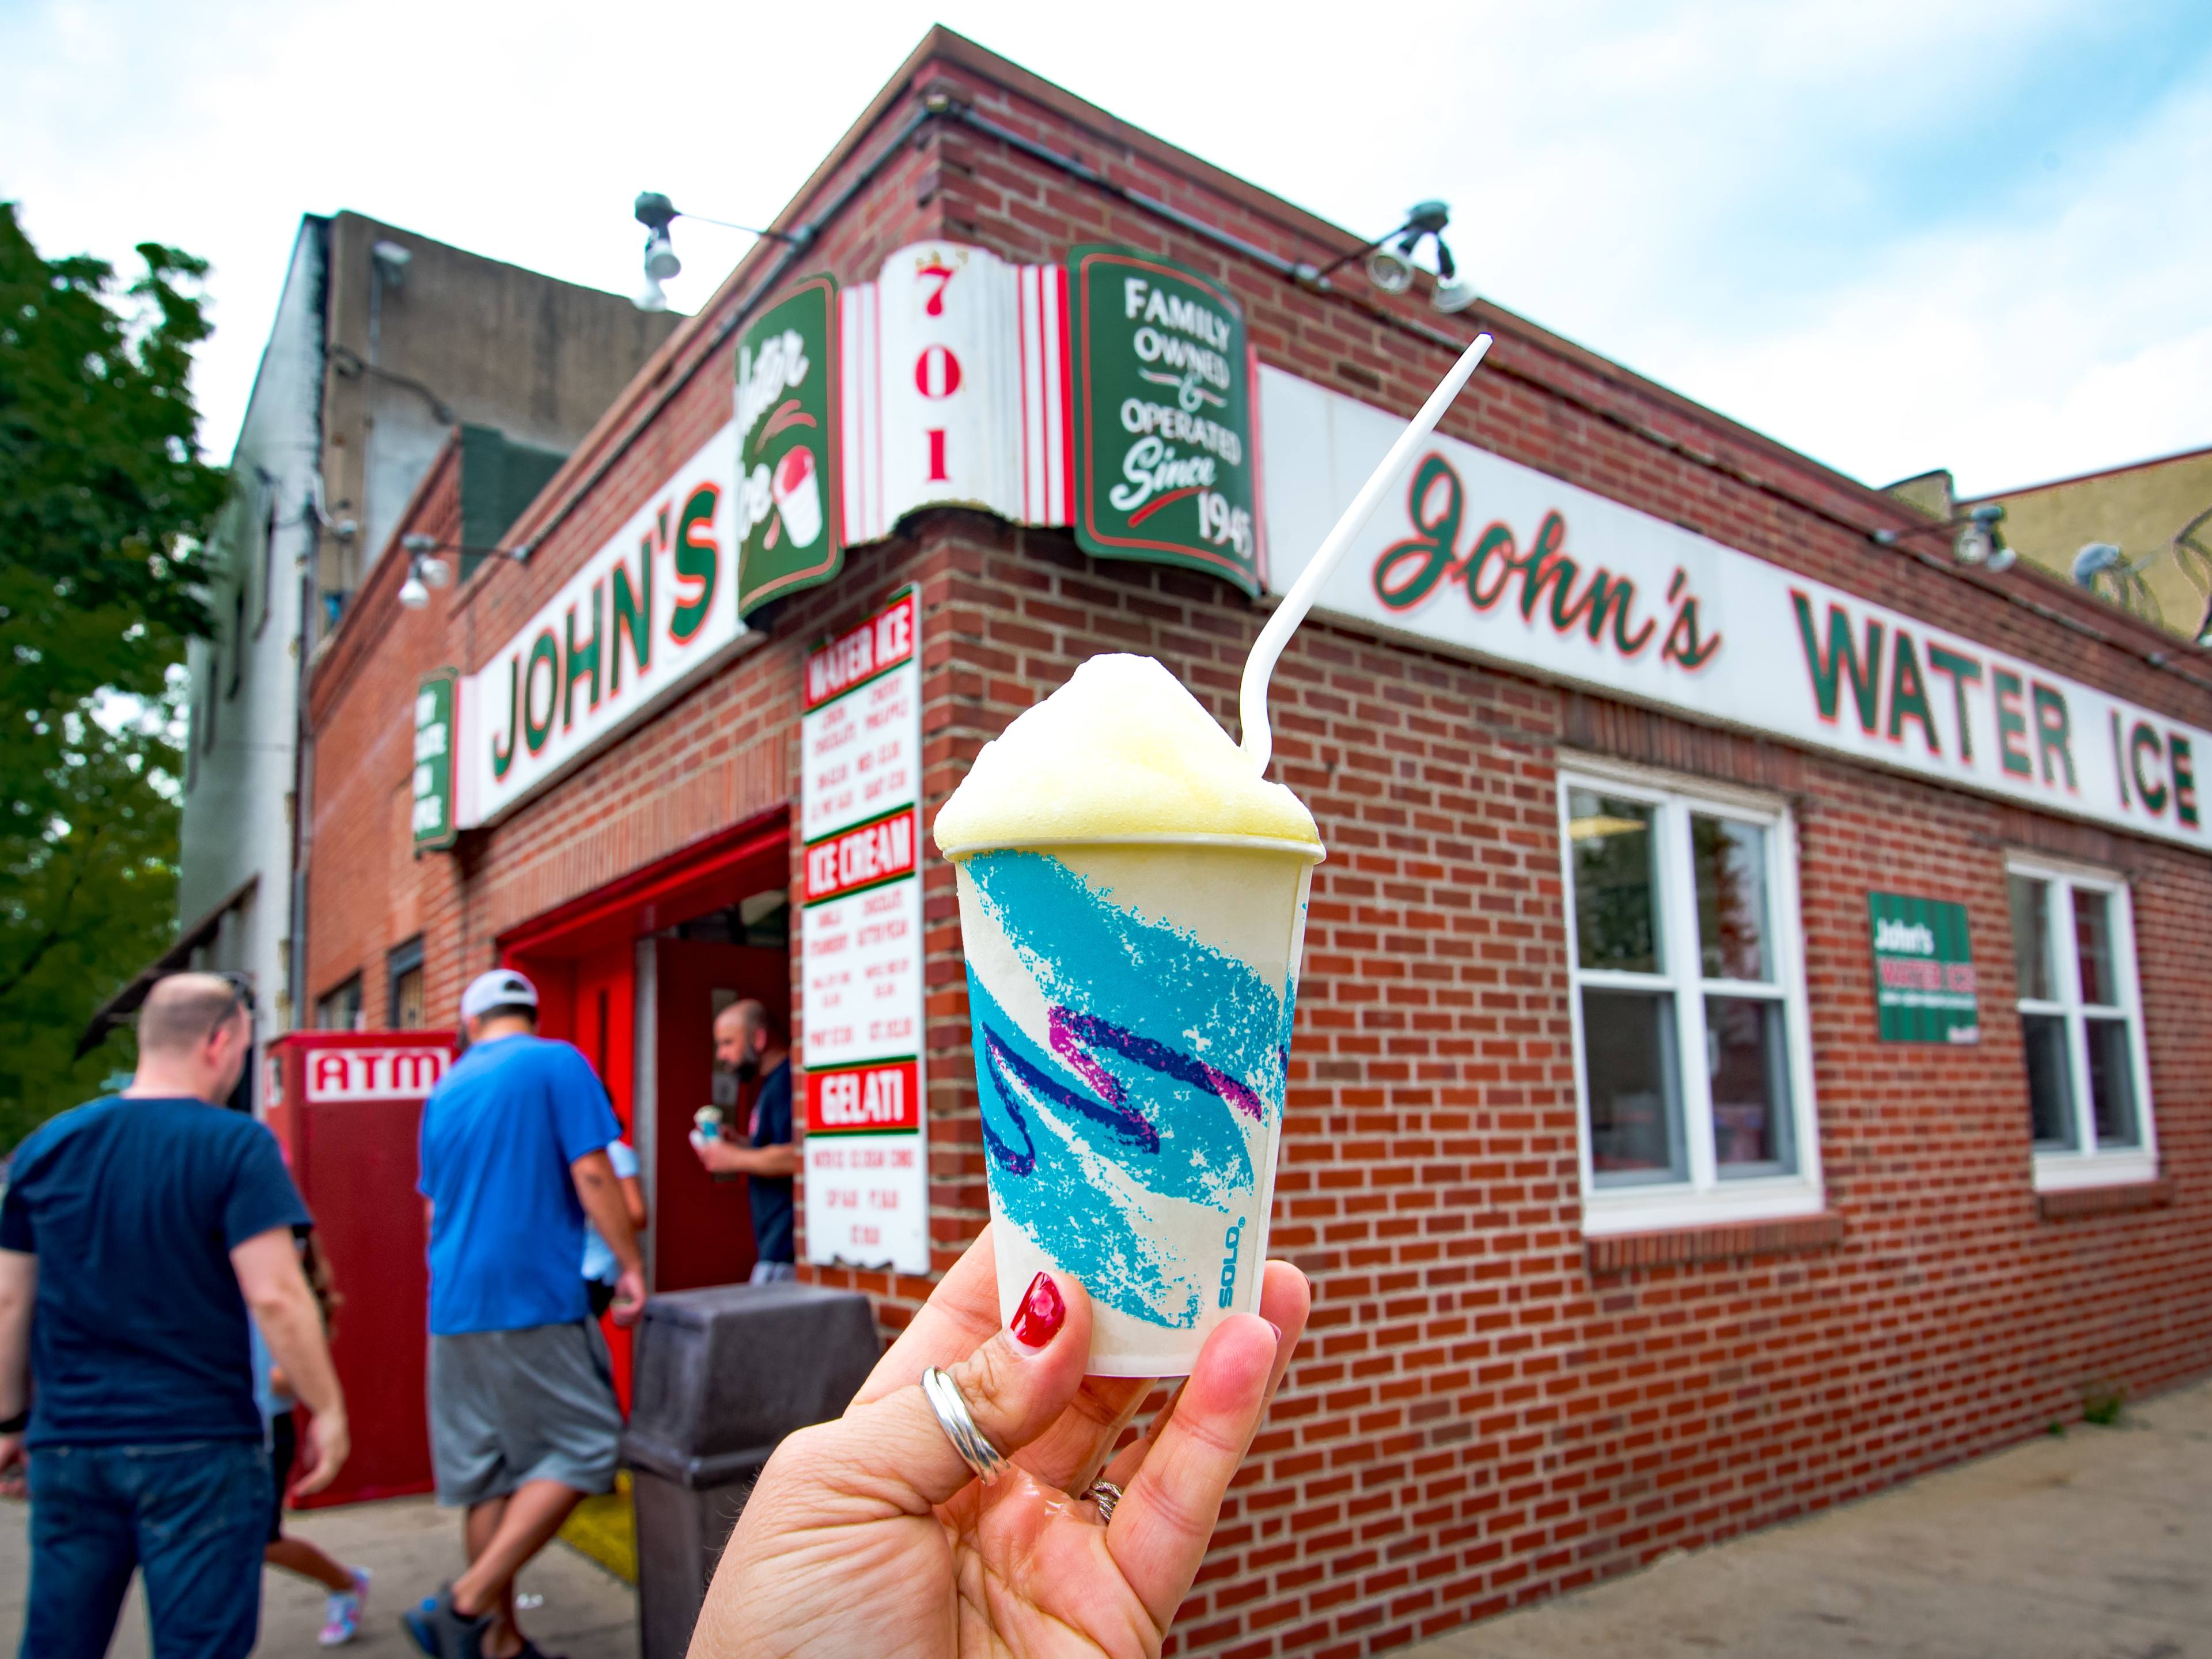 This is water ice from John's Water Ice.